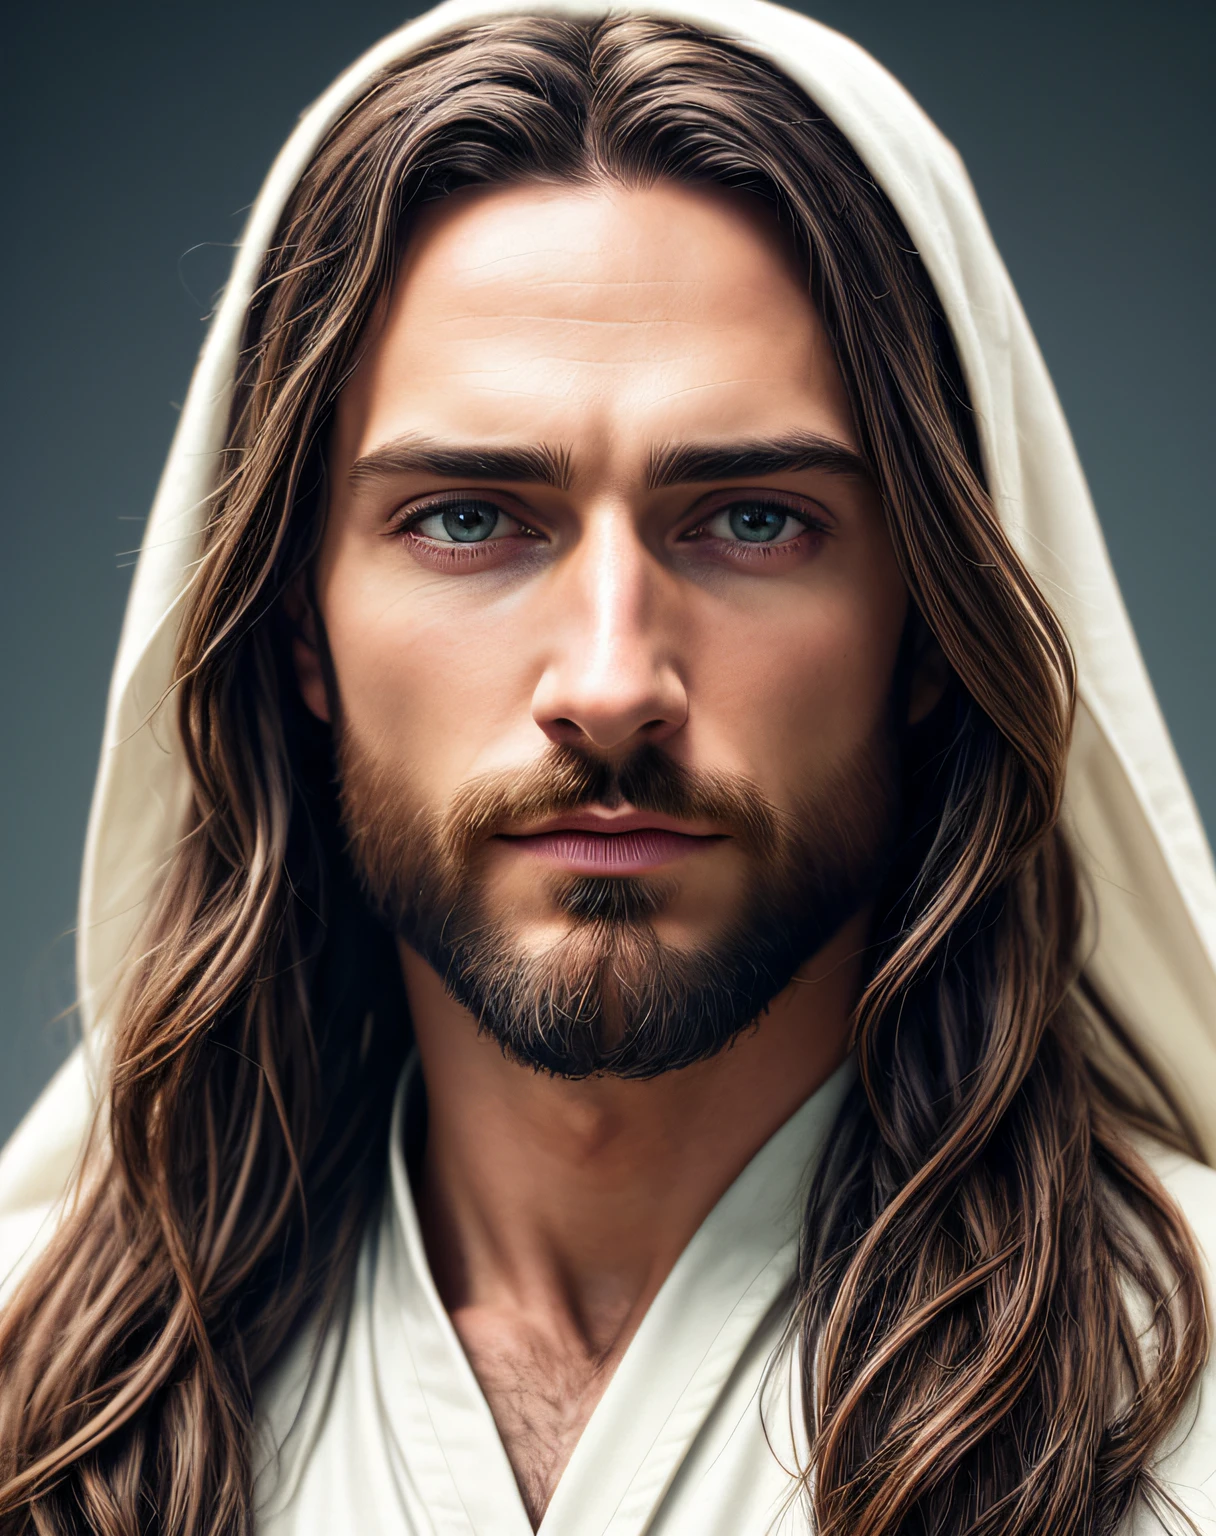 (Symmetrie),Zentriert,A ((Schließen)) up portrAit,(Jesus),A very thin white mAn with long hAir And A beArd,weAring A long white robe,35mm,nAturAl skin,clothes detAil, 8k Textur, 8k, insAne detAils, intricAte detAils, hyperdetAiledhighly detAiled,reAlistic,soft cinemAtic light,HDR,shArp focus, ((((cinemAtic look)))),intricAte, elegAnt, highly detAiled